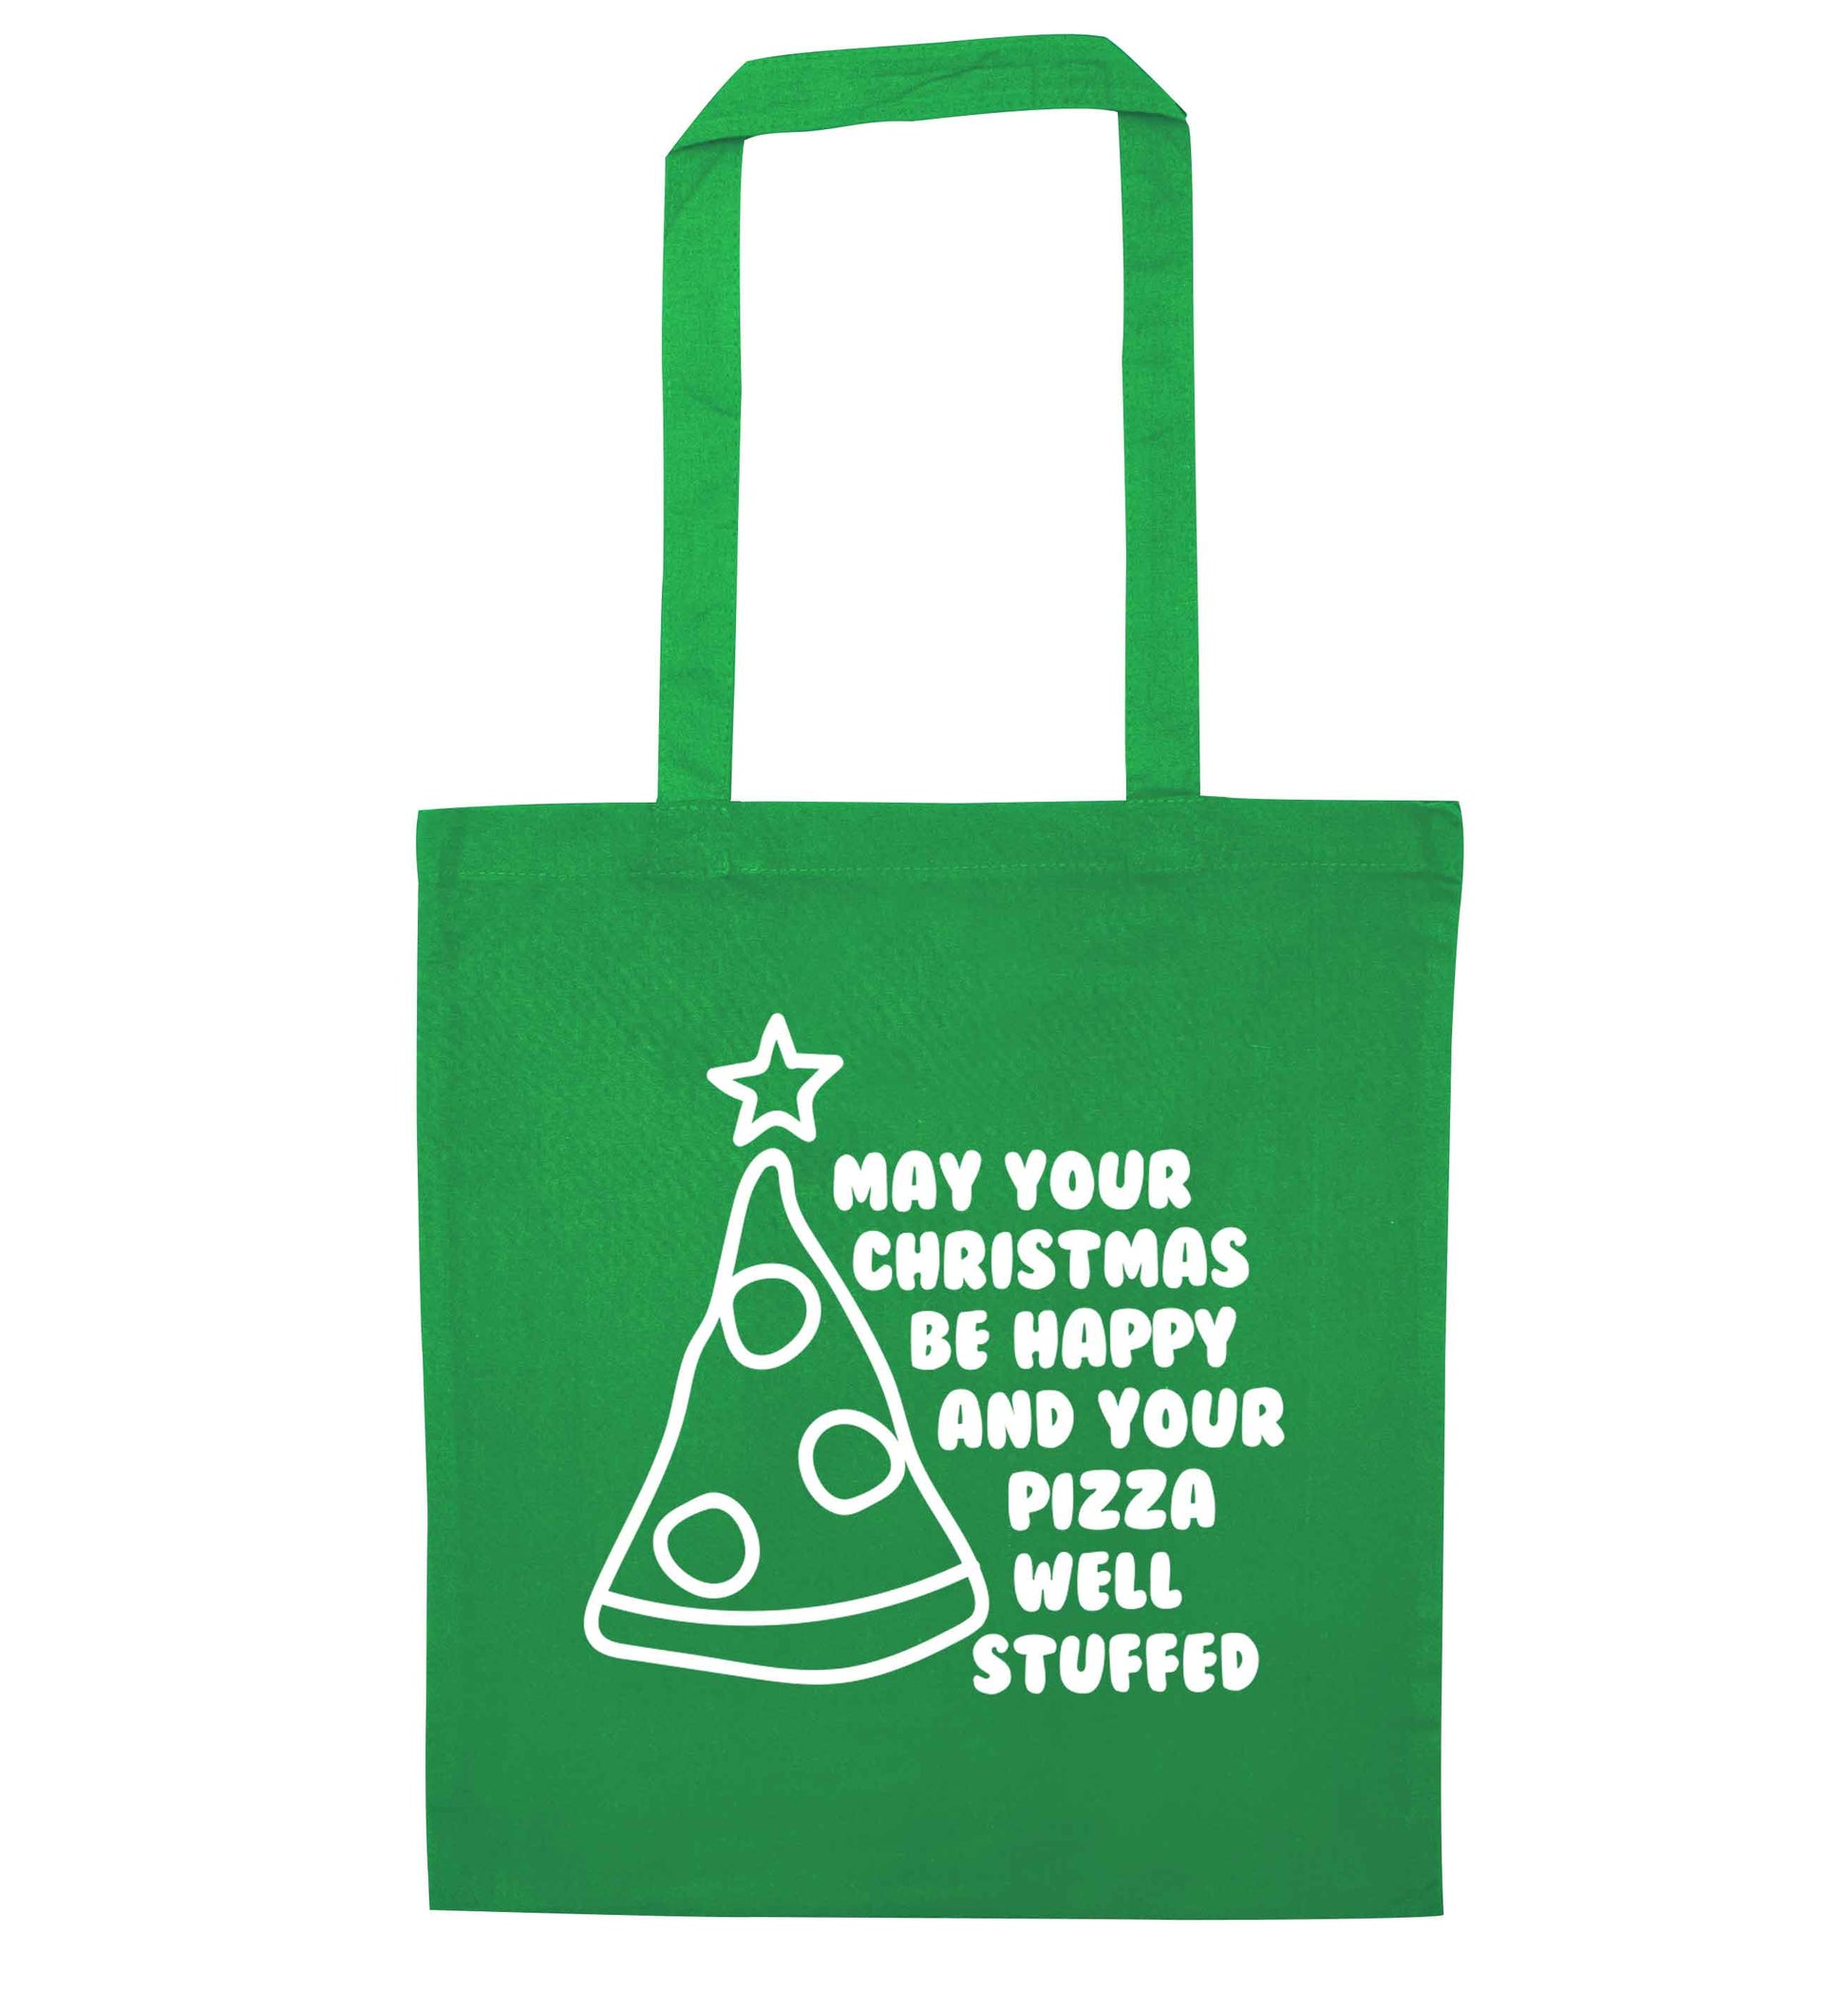 May your Christmas be happy and your pizza well stuffed green tote bag